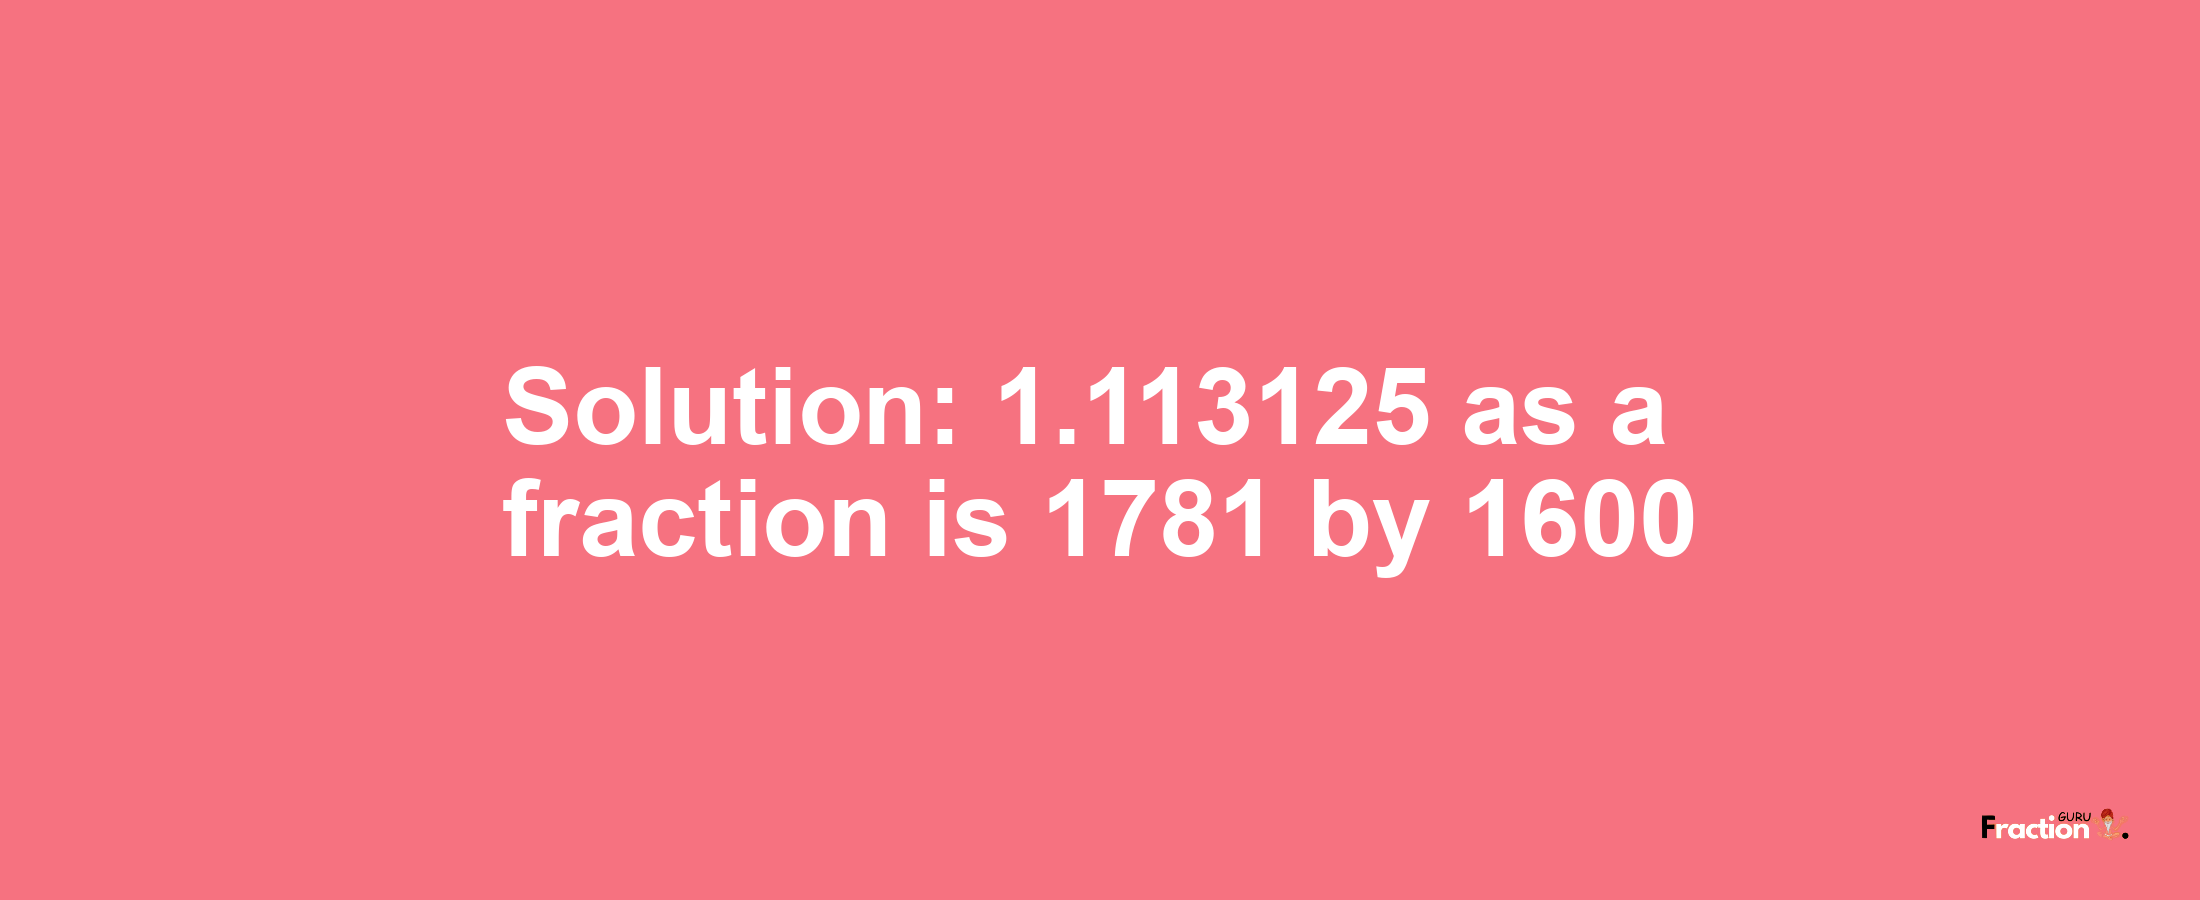 Solution:1.113125 as a fraction is 1781/1600